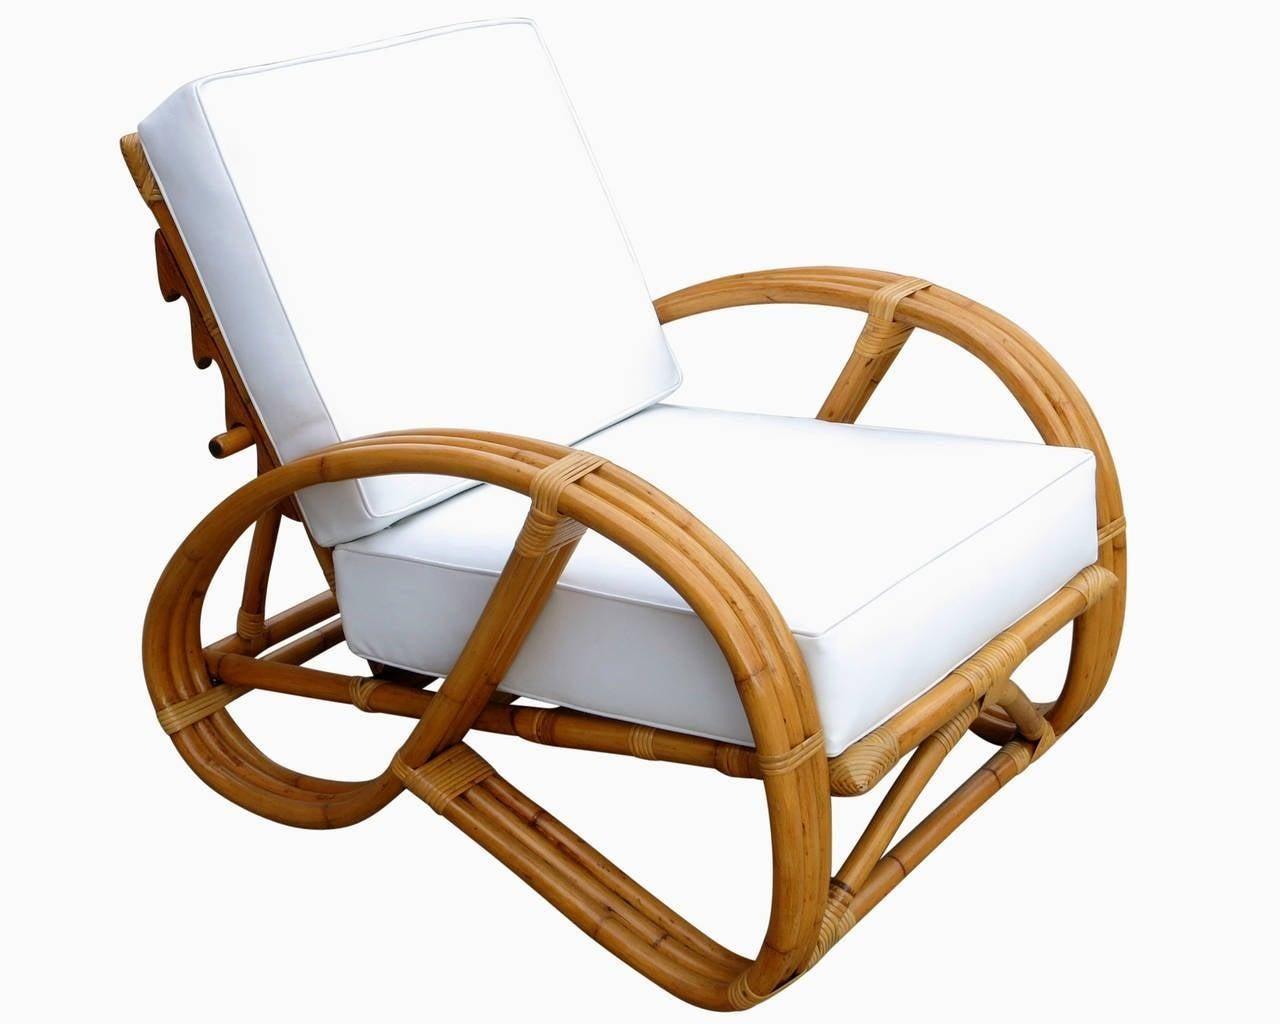 This rare rattan reclining lounge chair with 3/4 Pretzel arms arch-shaped base. The accompanying bent rattan ottoman features three-strand U-shaped legs with matching wave detail.
Measurements
Chair: 32